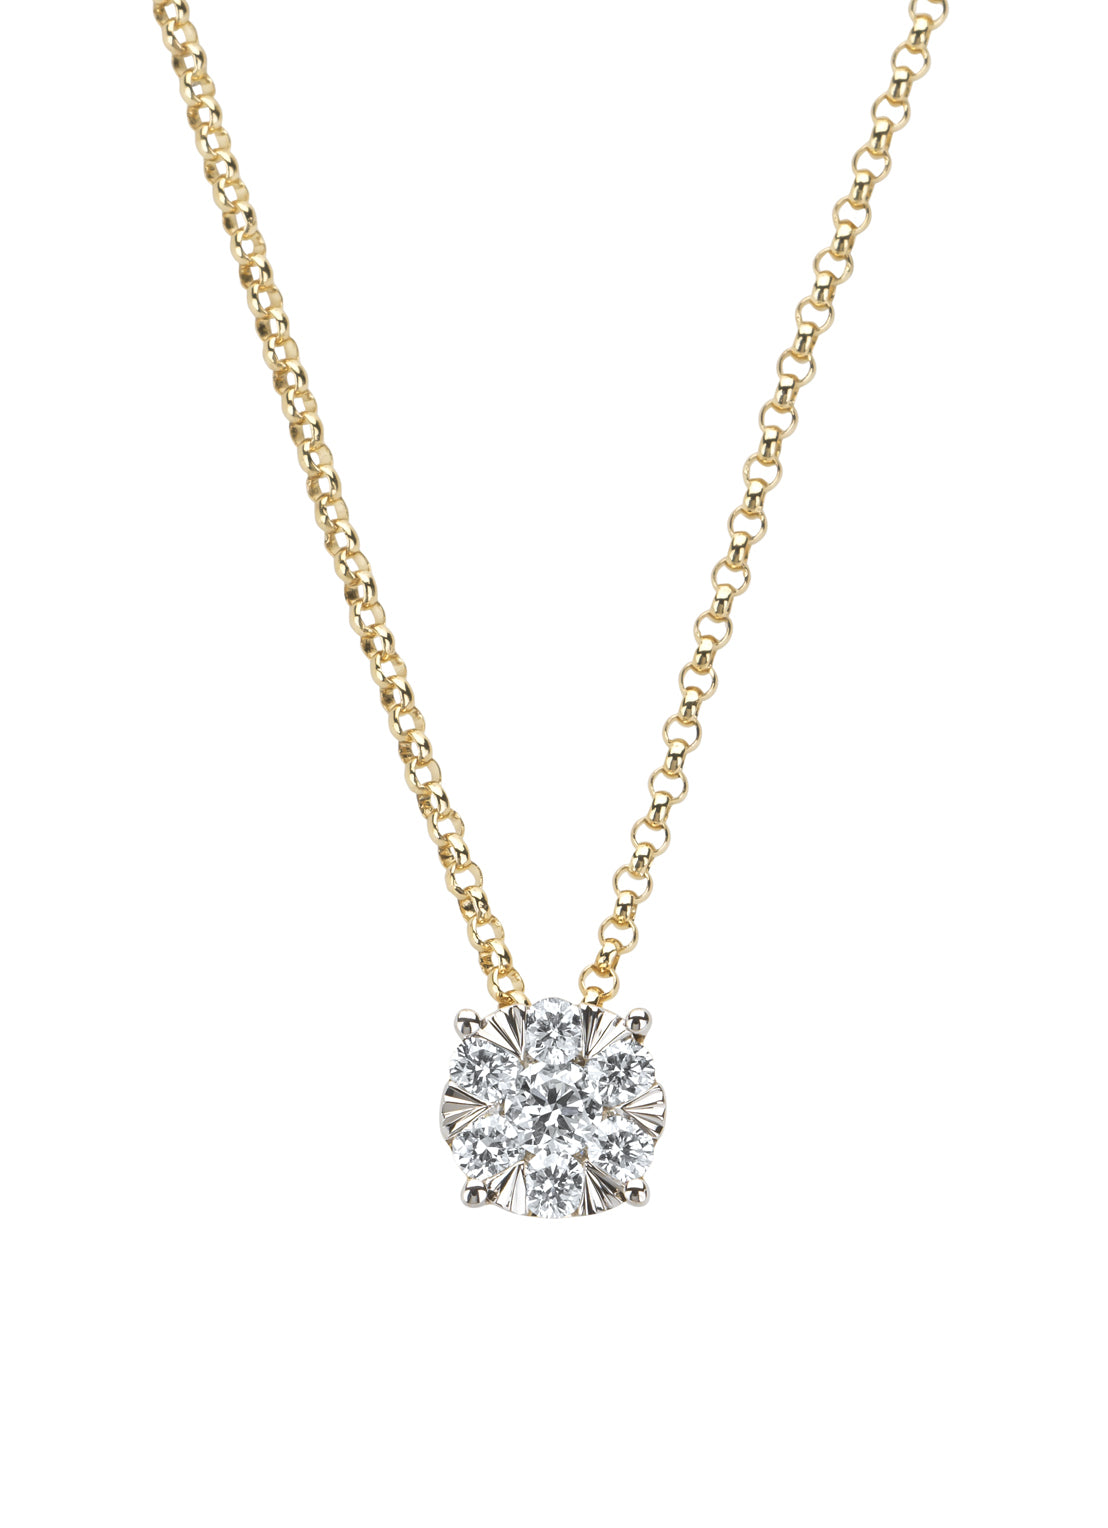 Golden pendant with necklace, 0.24 CT Diamond, Enchanted